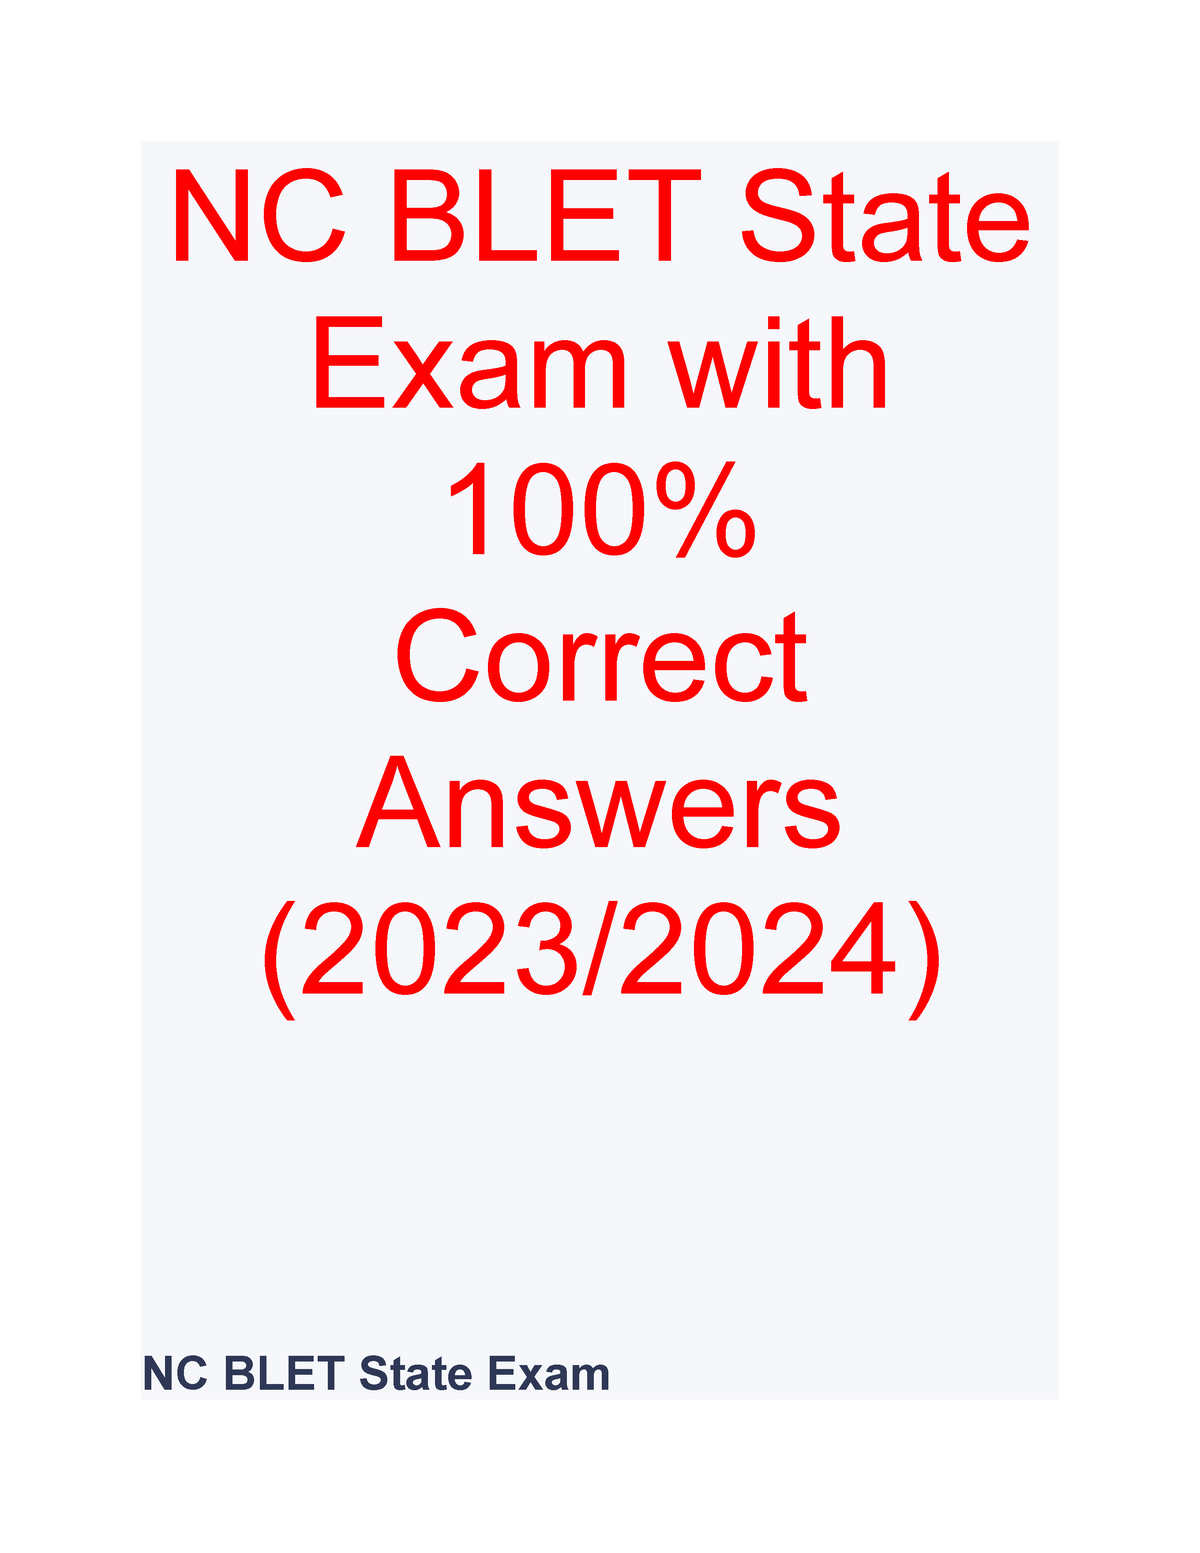 4 NC BLET State Exam with 100 Correct Answers (20232024) NC BLET